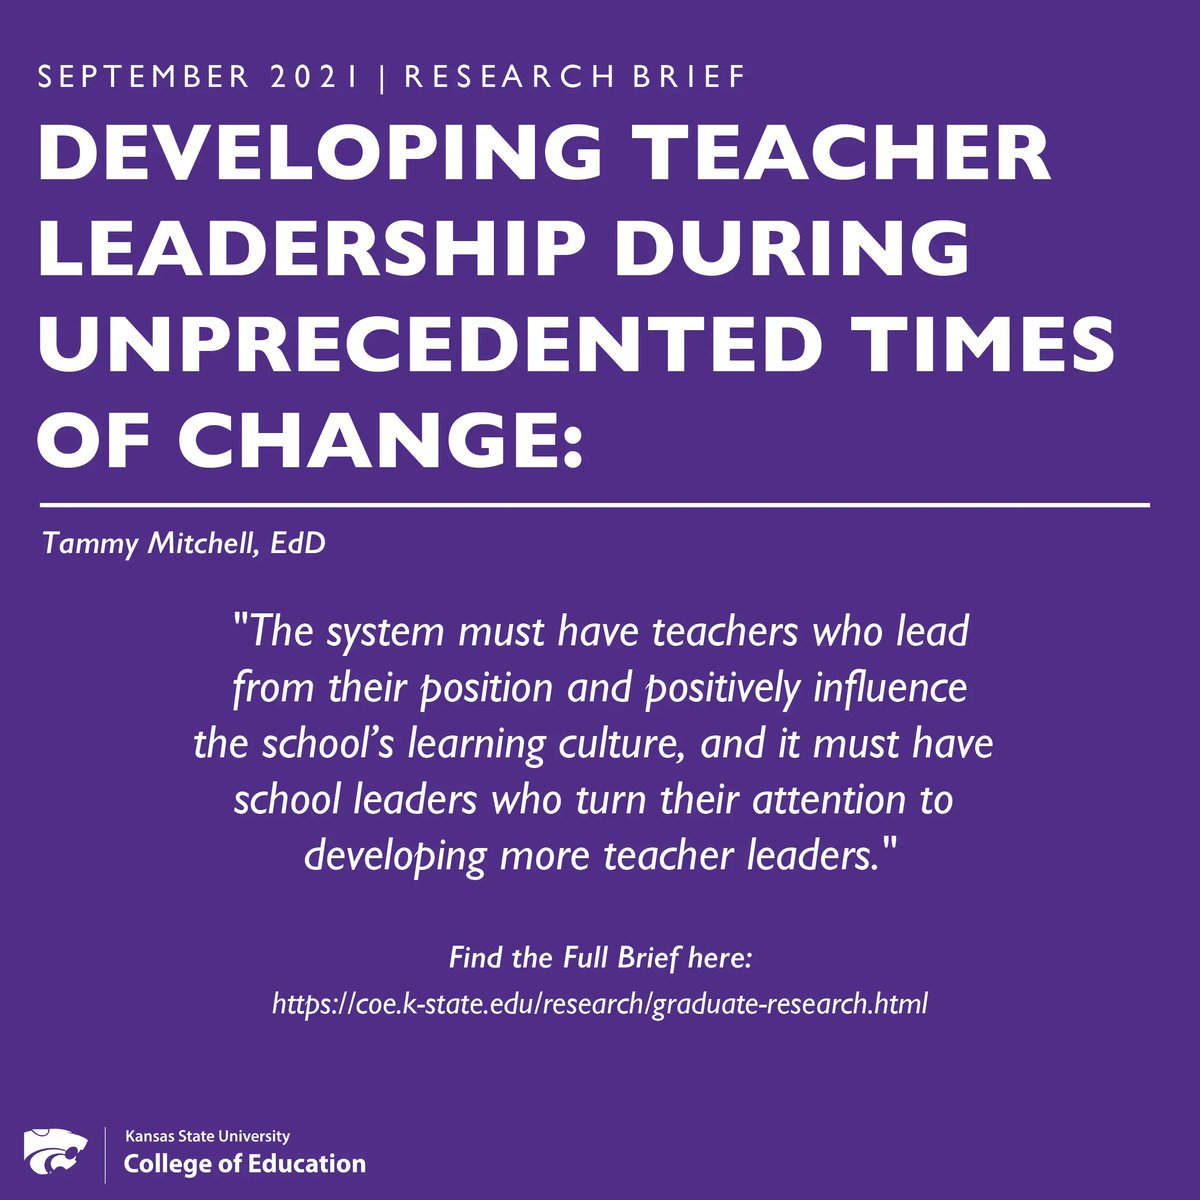 We are proud to be a leader in education research! Tammy Mitchell has written her dissertation over the important topic of educational leadership being needed during uncertain times. Check out her research brief to dive more into leadership and education. @tammy_mitchel @ksdehq